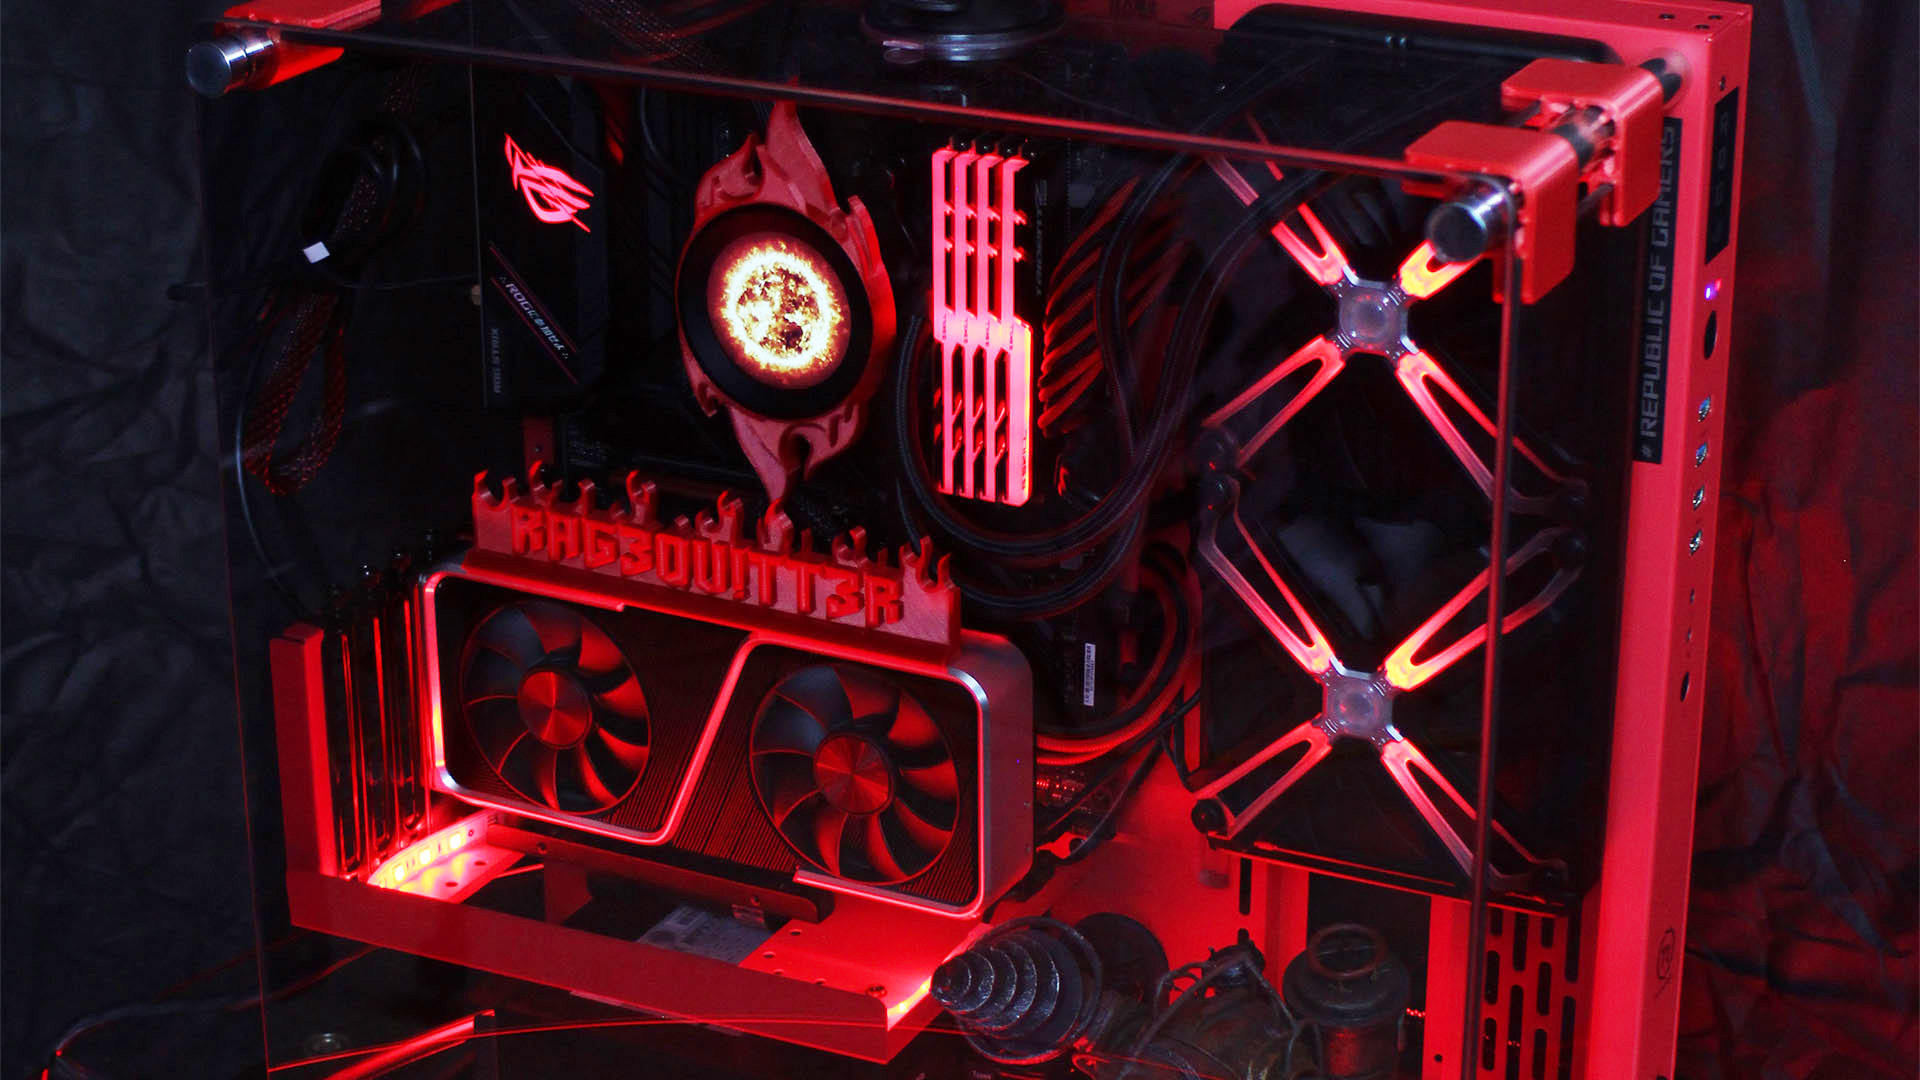 The bioshock pc build in its red RGB light